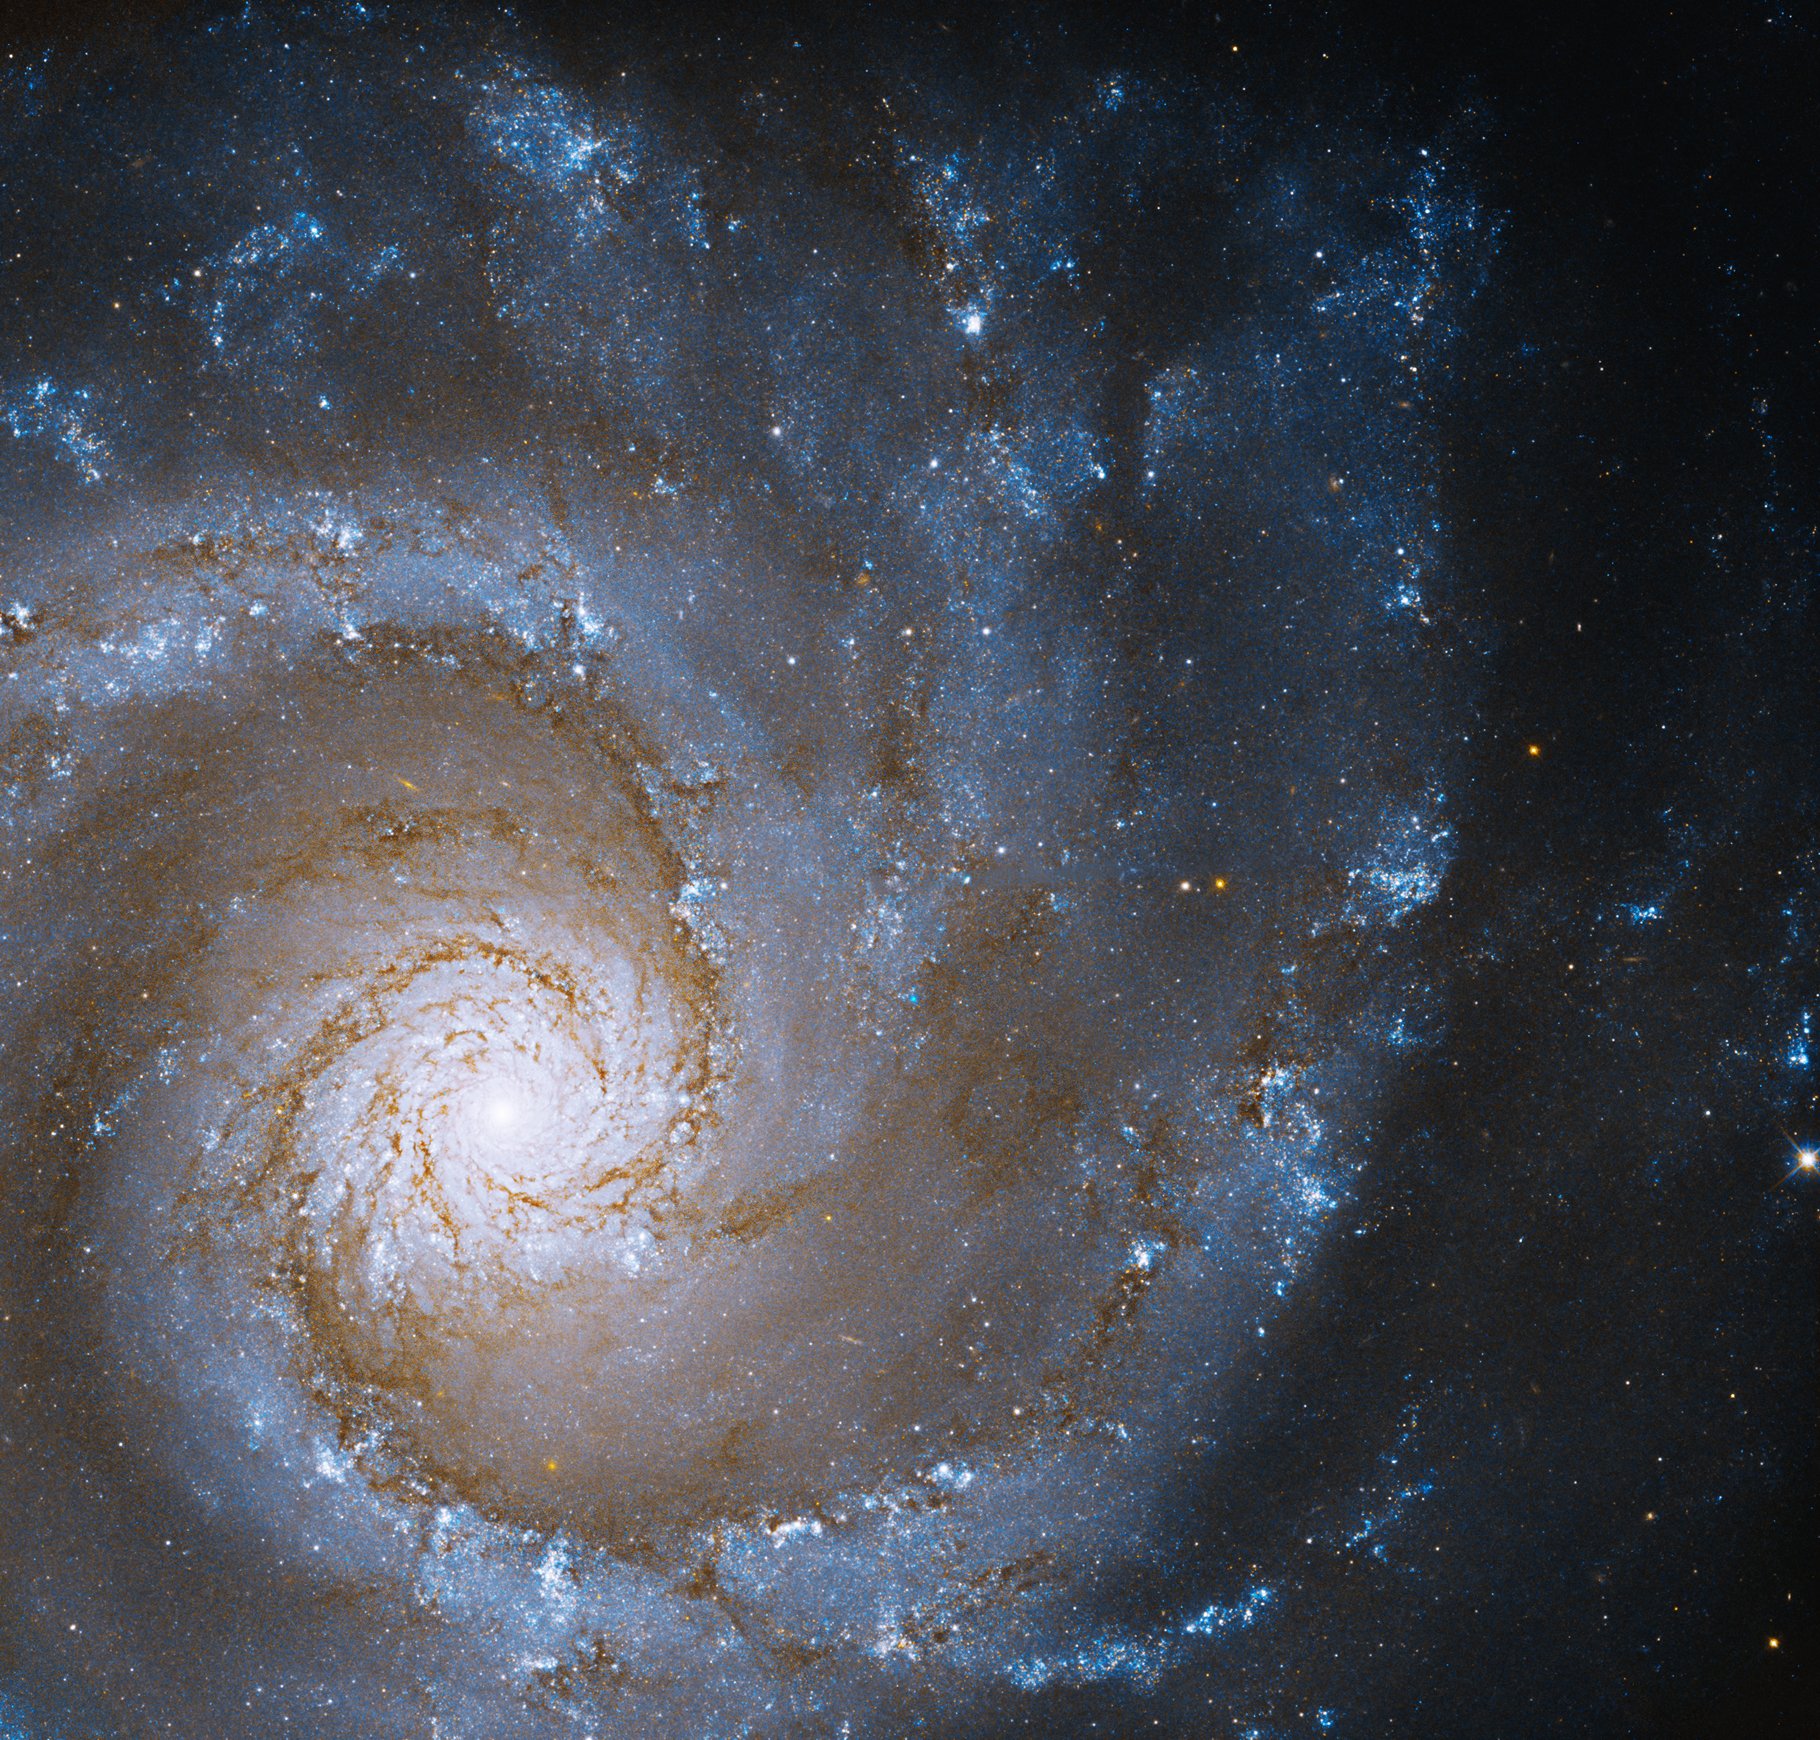 This mesmerizing picture from Hubble shows Grand Design Spiral galaxy